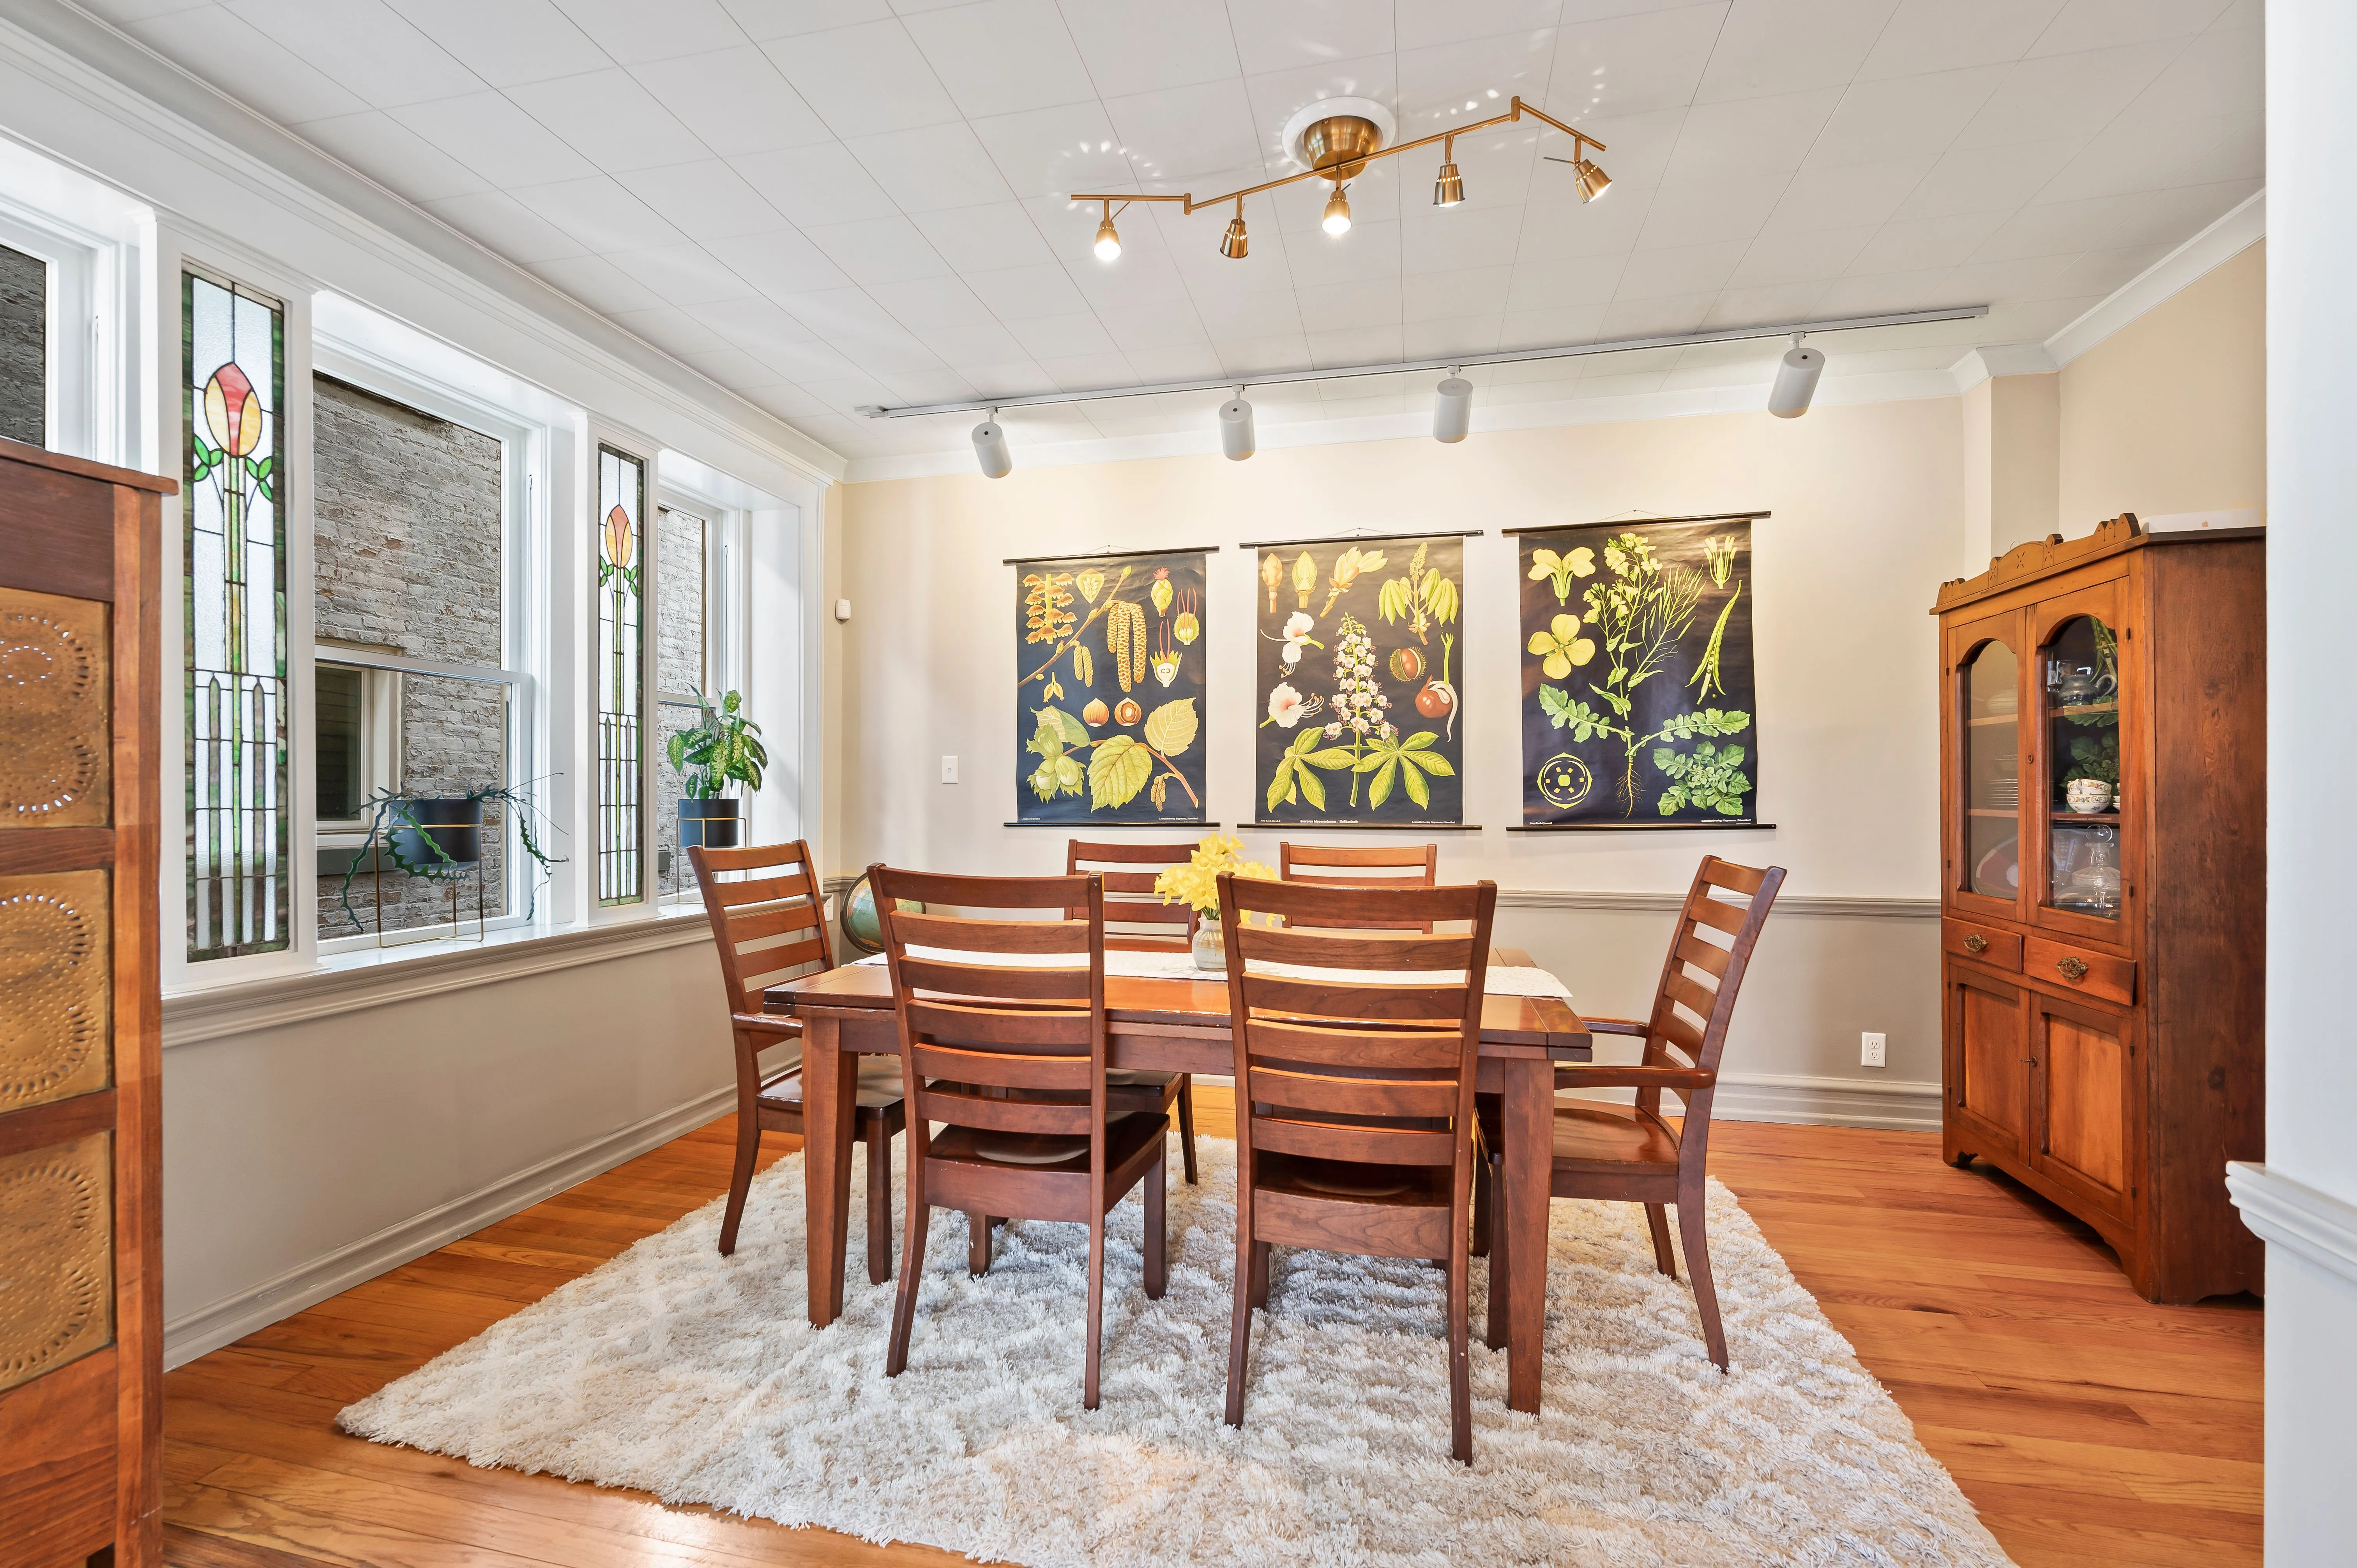 Bright dining room with wooden table and chairs, hardwood floors, white area rug, and artwork on the walls.